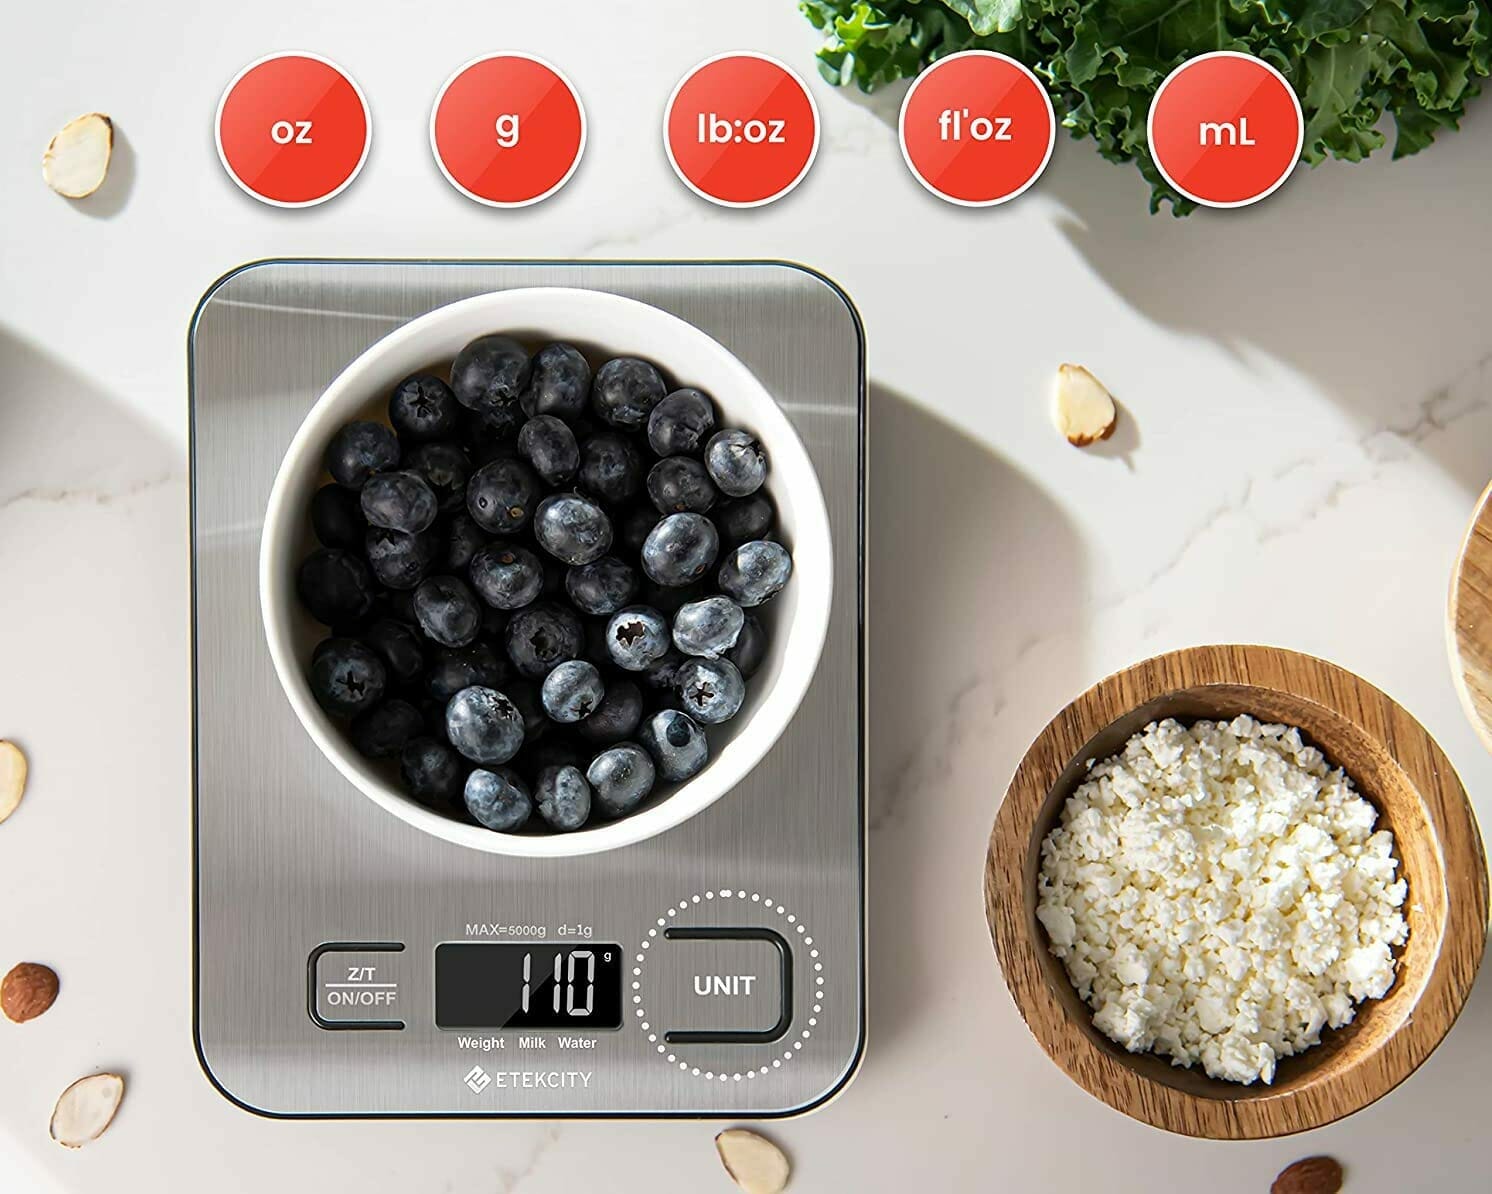 Etekcity Food Kitchen Scale review